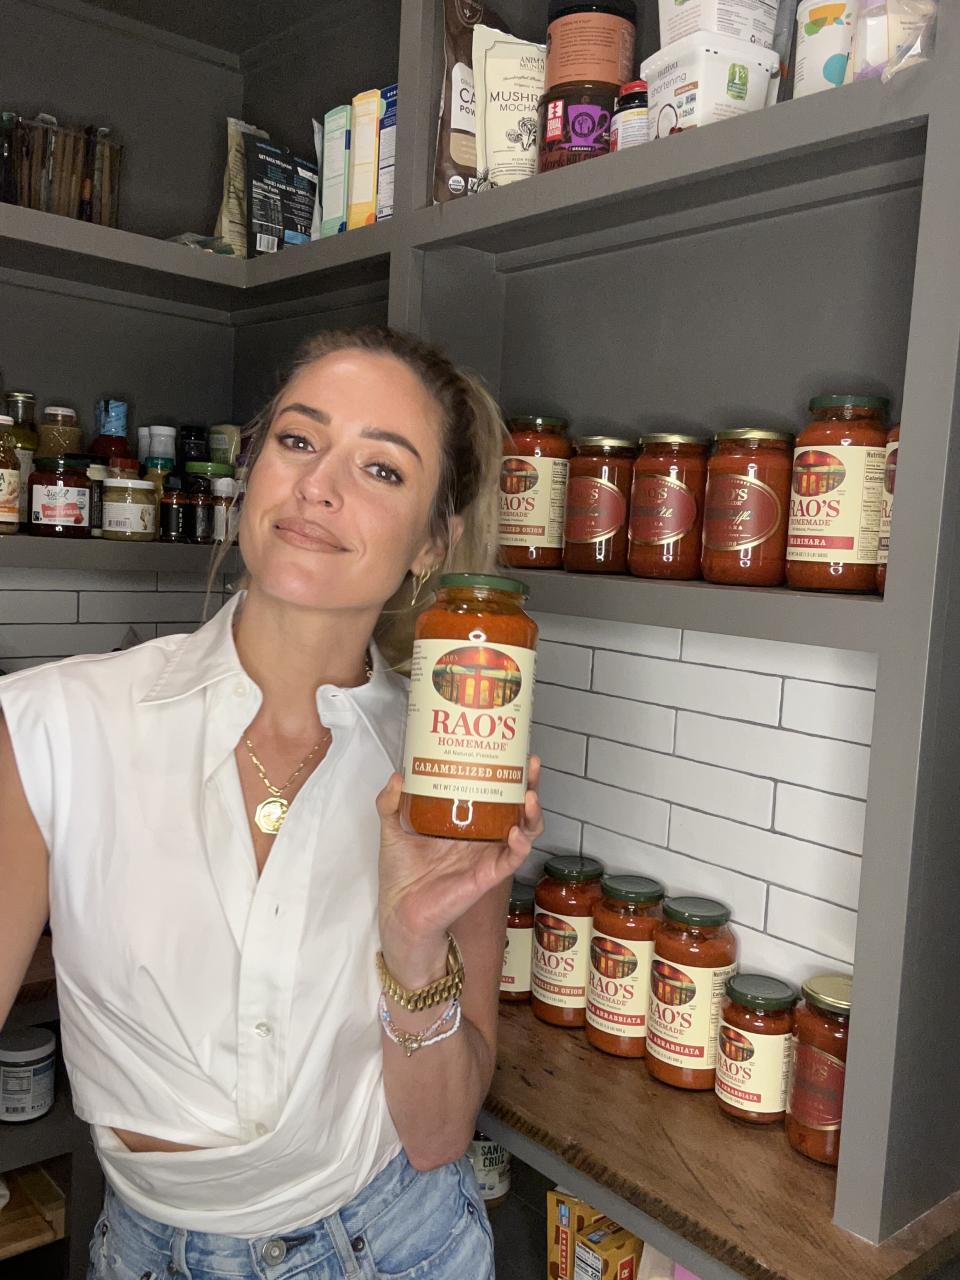 Cavallari is helping to launch The Saucery by Rao's Homemade pop-up featuring new vodka arrabbiata sauce, caramelized onion sauce and arrabbiata pizza sauce, plus new Italian-style lentil and butternut squash soups. (Photo: Courtesy of Rao's Homemade)